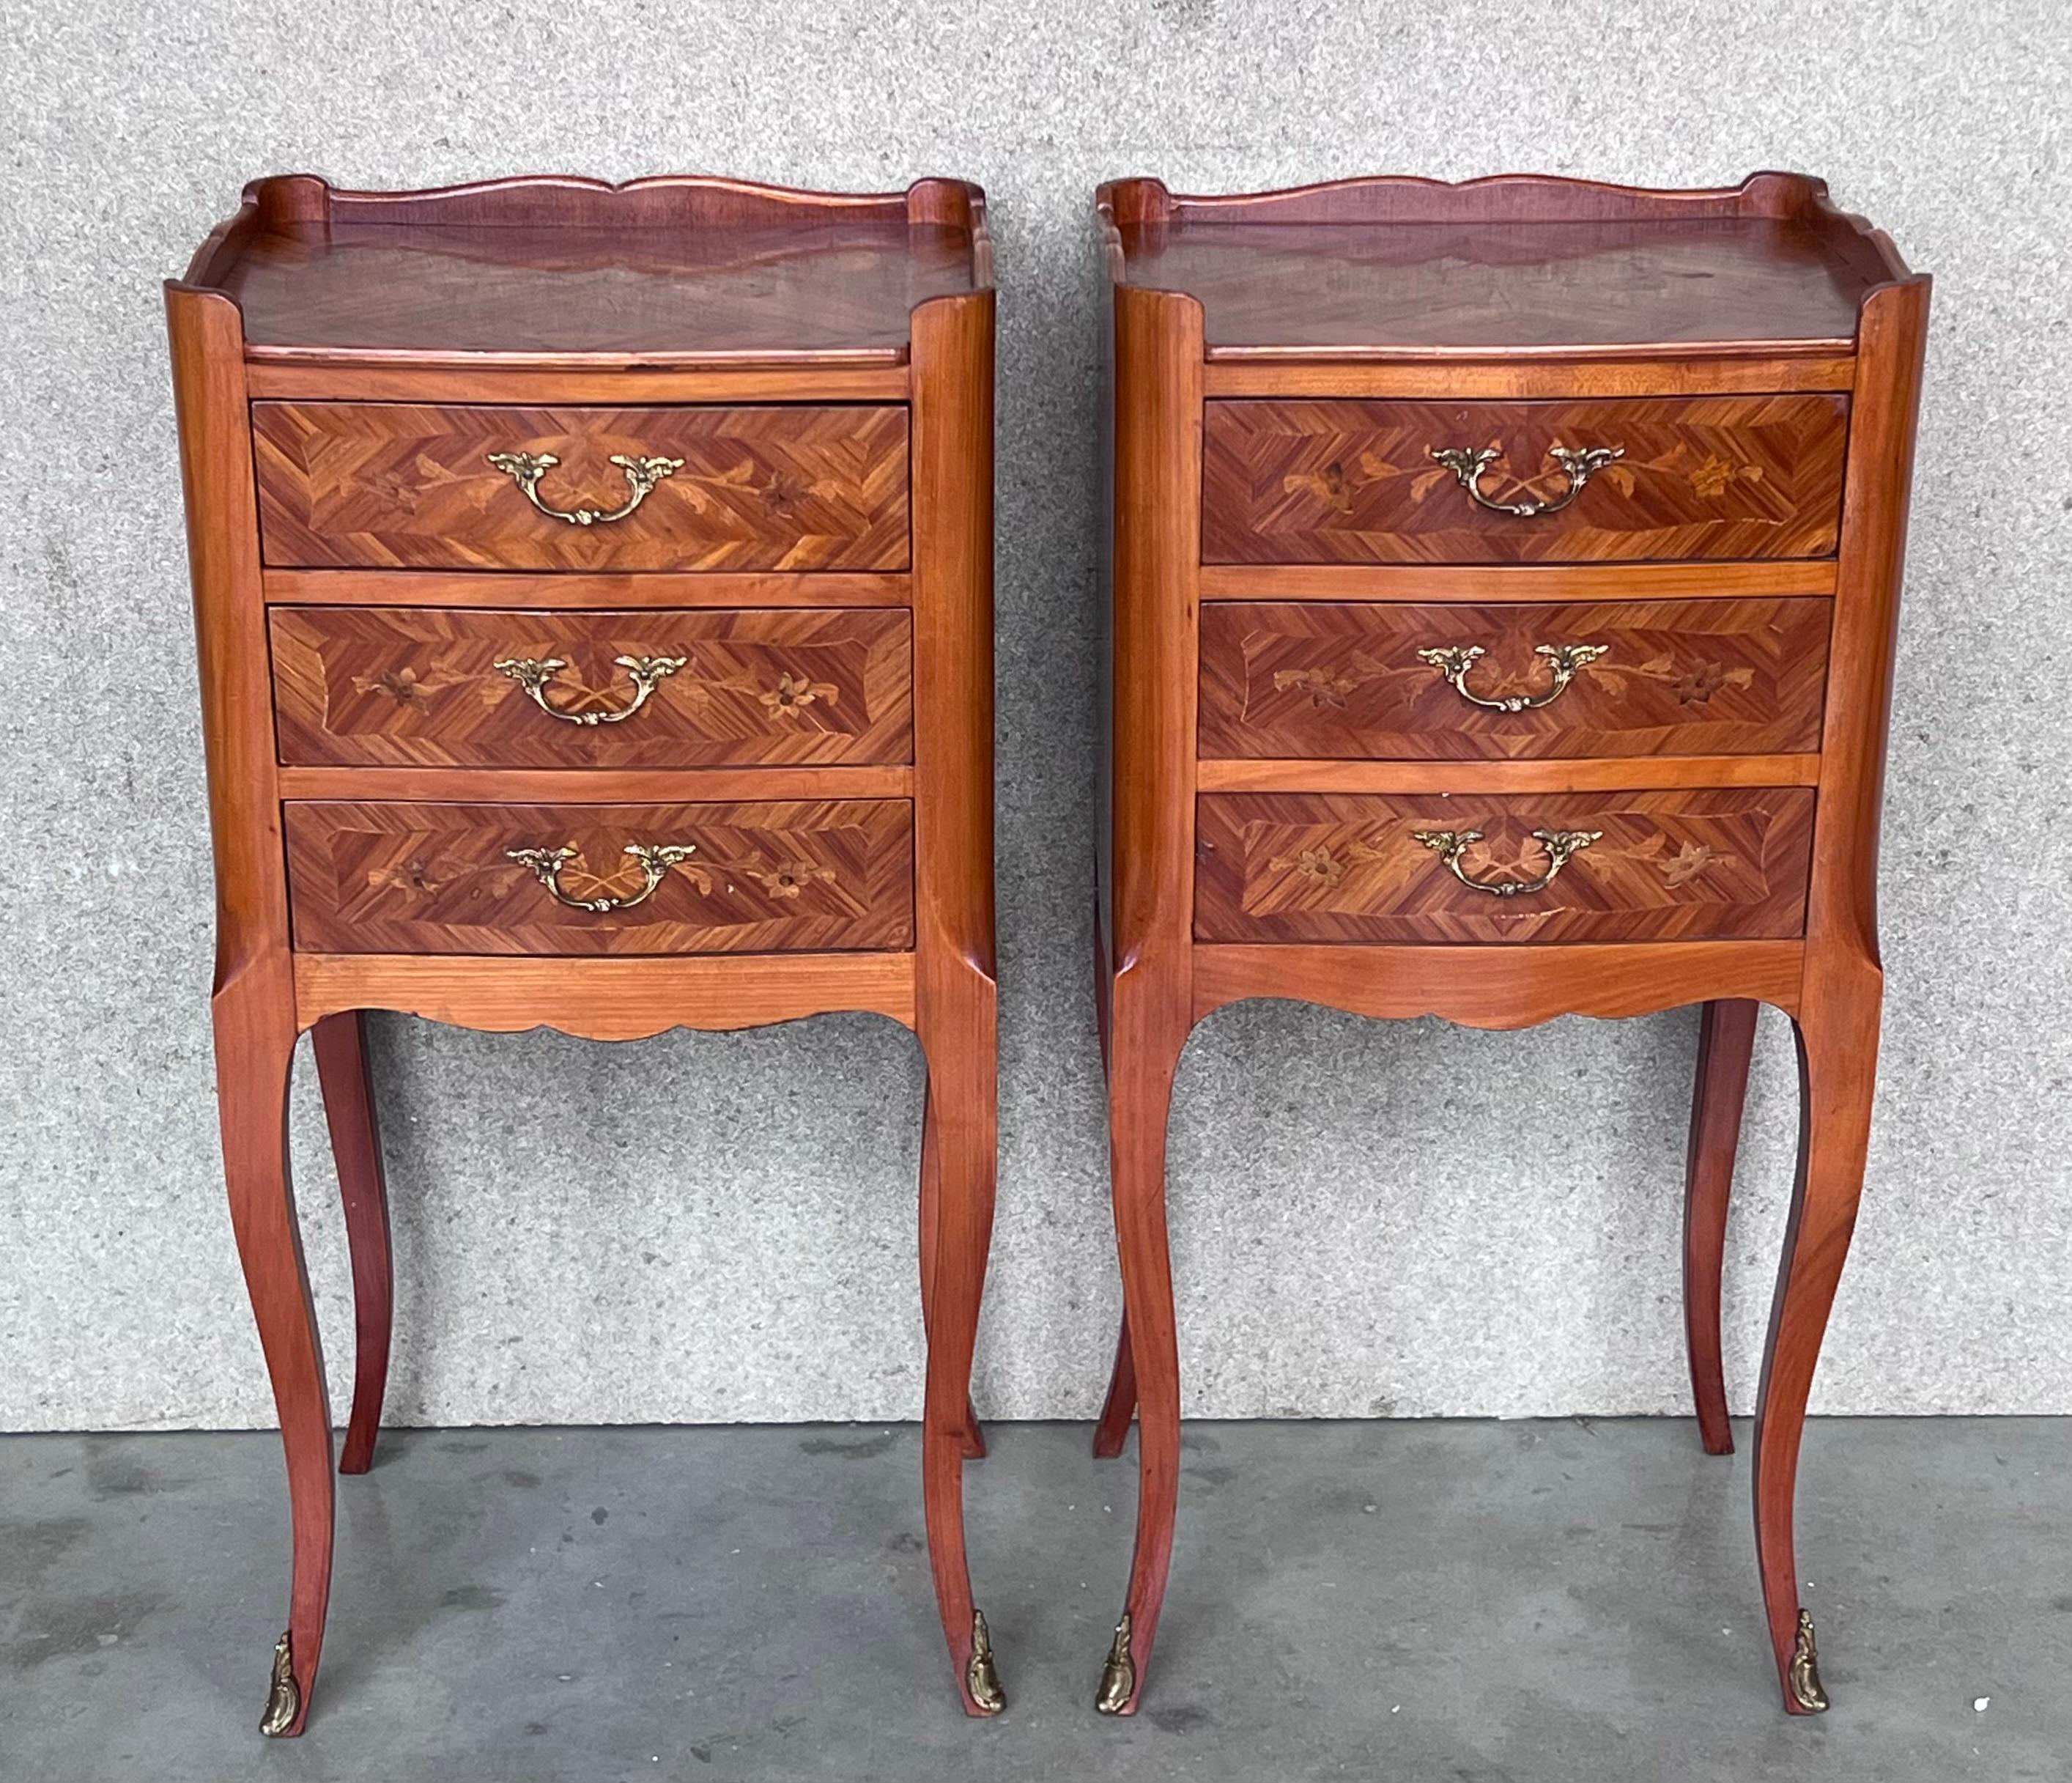 A pretty pair of French, inlaid kingwood, one drawer nightstands with tray accents, circa 1930.
Pair of French Louis XV style walnut bedside tables from the early 20th century. This pair of French 'tables de chevet' was created in the early years